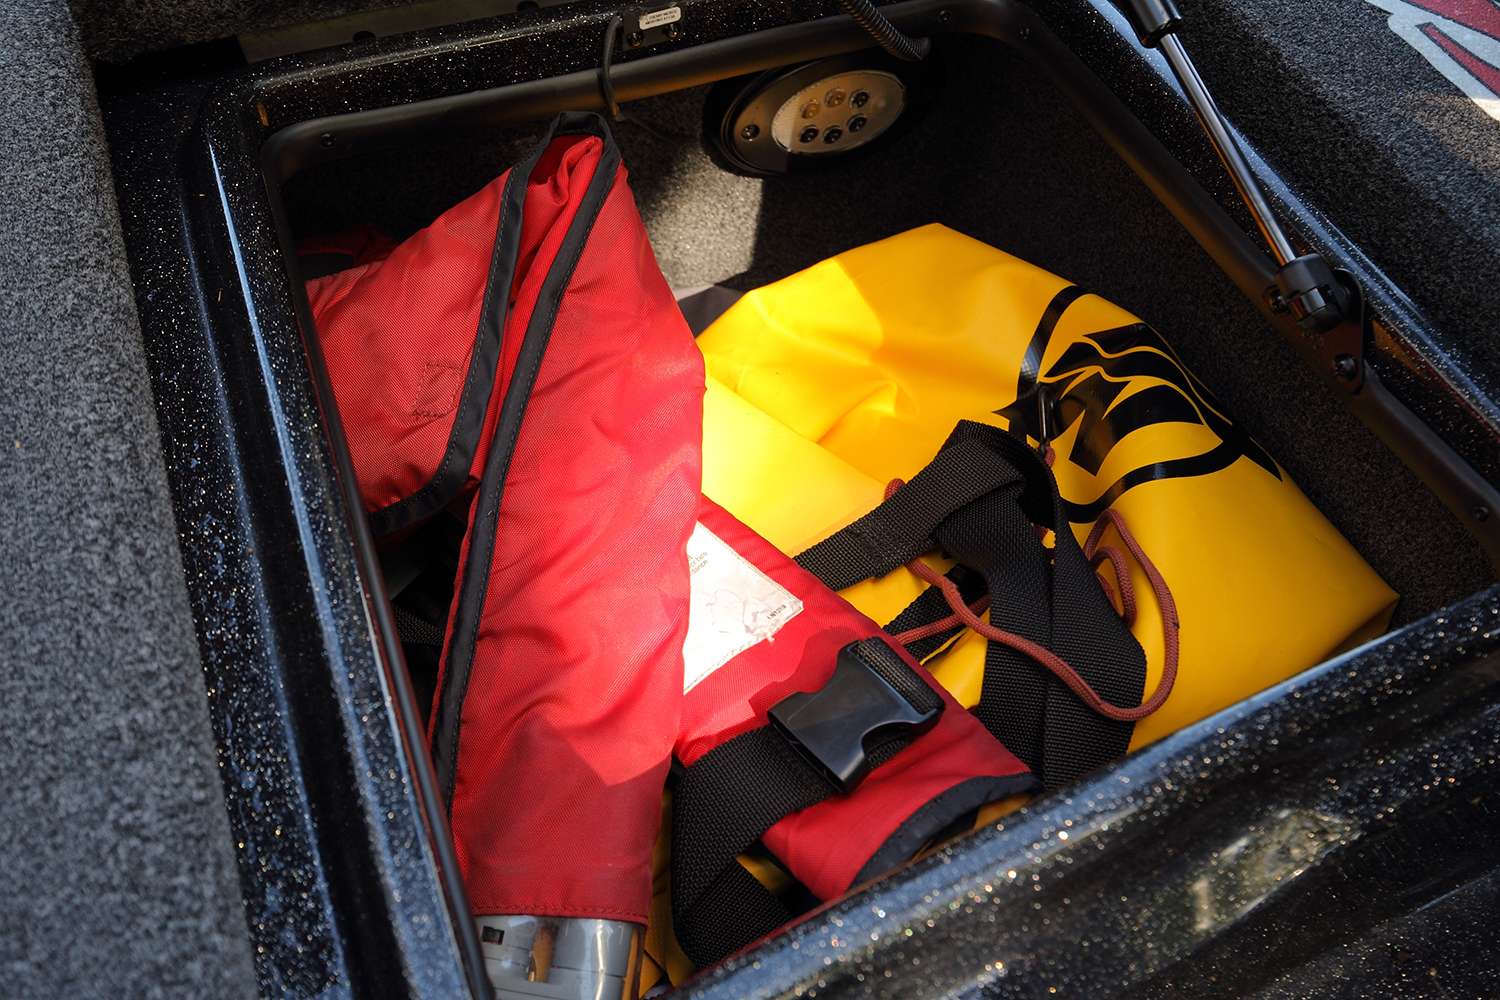 Inside the right rod locker, VanDam stores an Under Armour rain jacket, a life jacket, a sweatshirt and dry bag that he uses for his phone, wallet and important paperwork.
